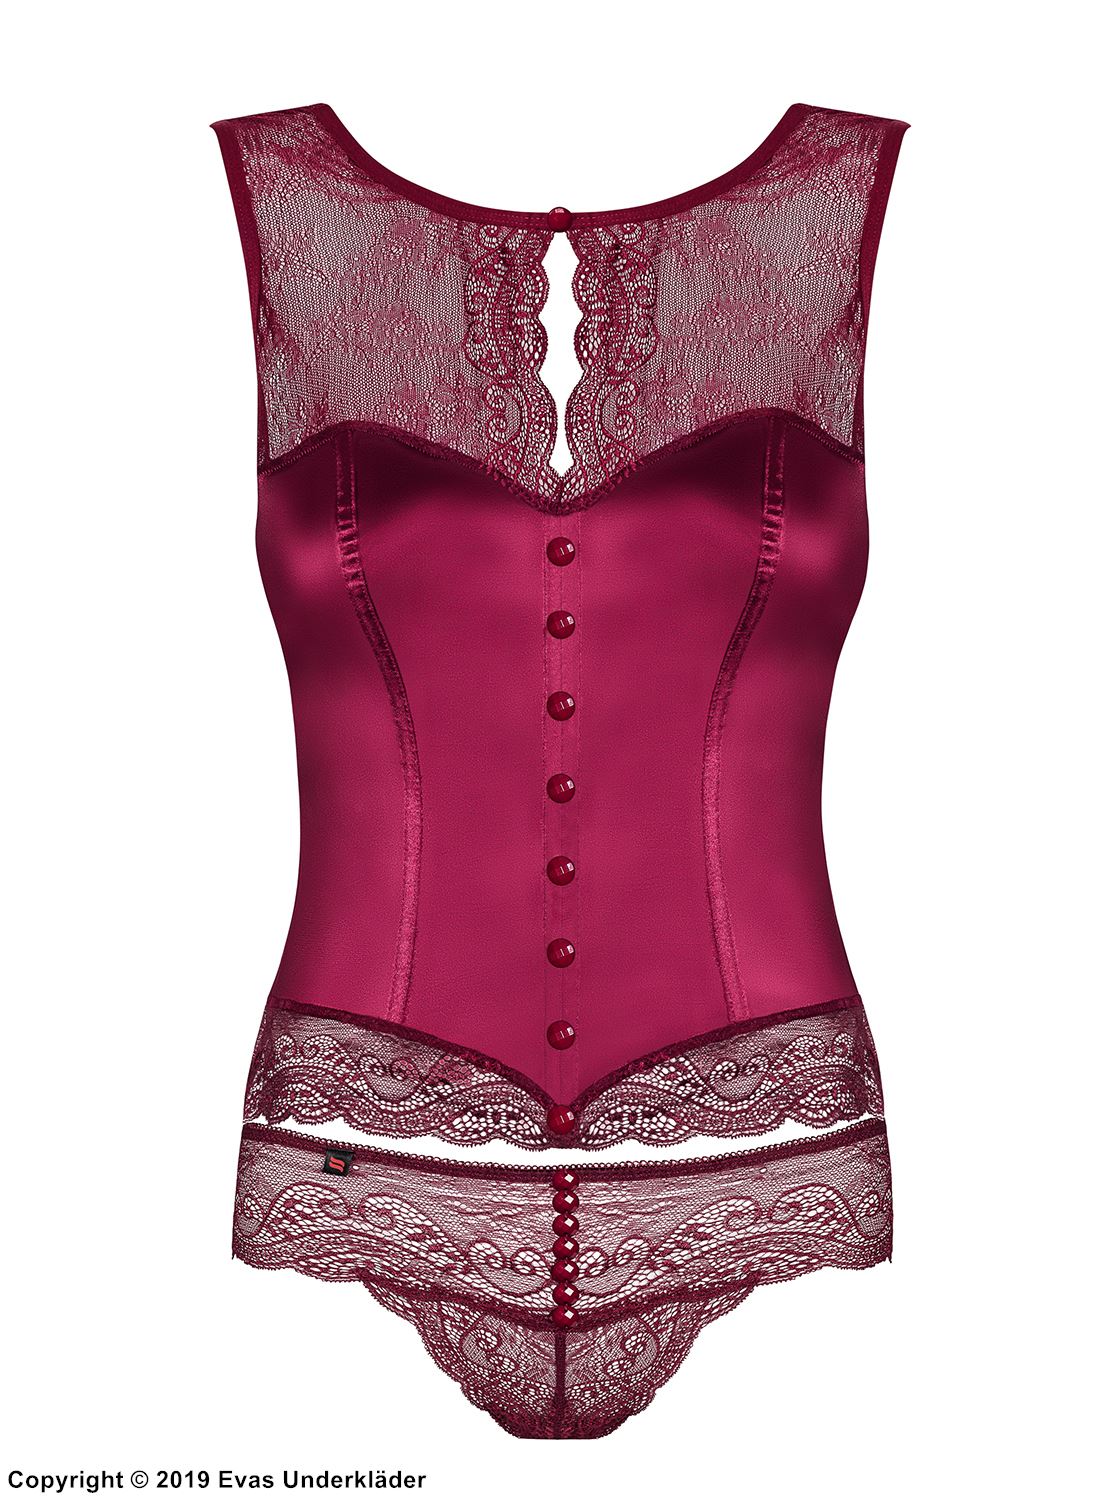 Elegant corset, lacing, light shaping effect, buttons